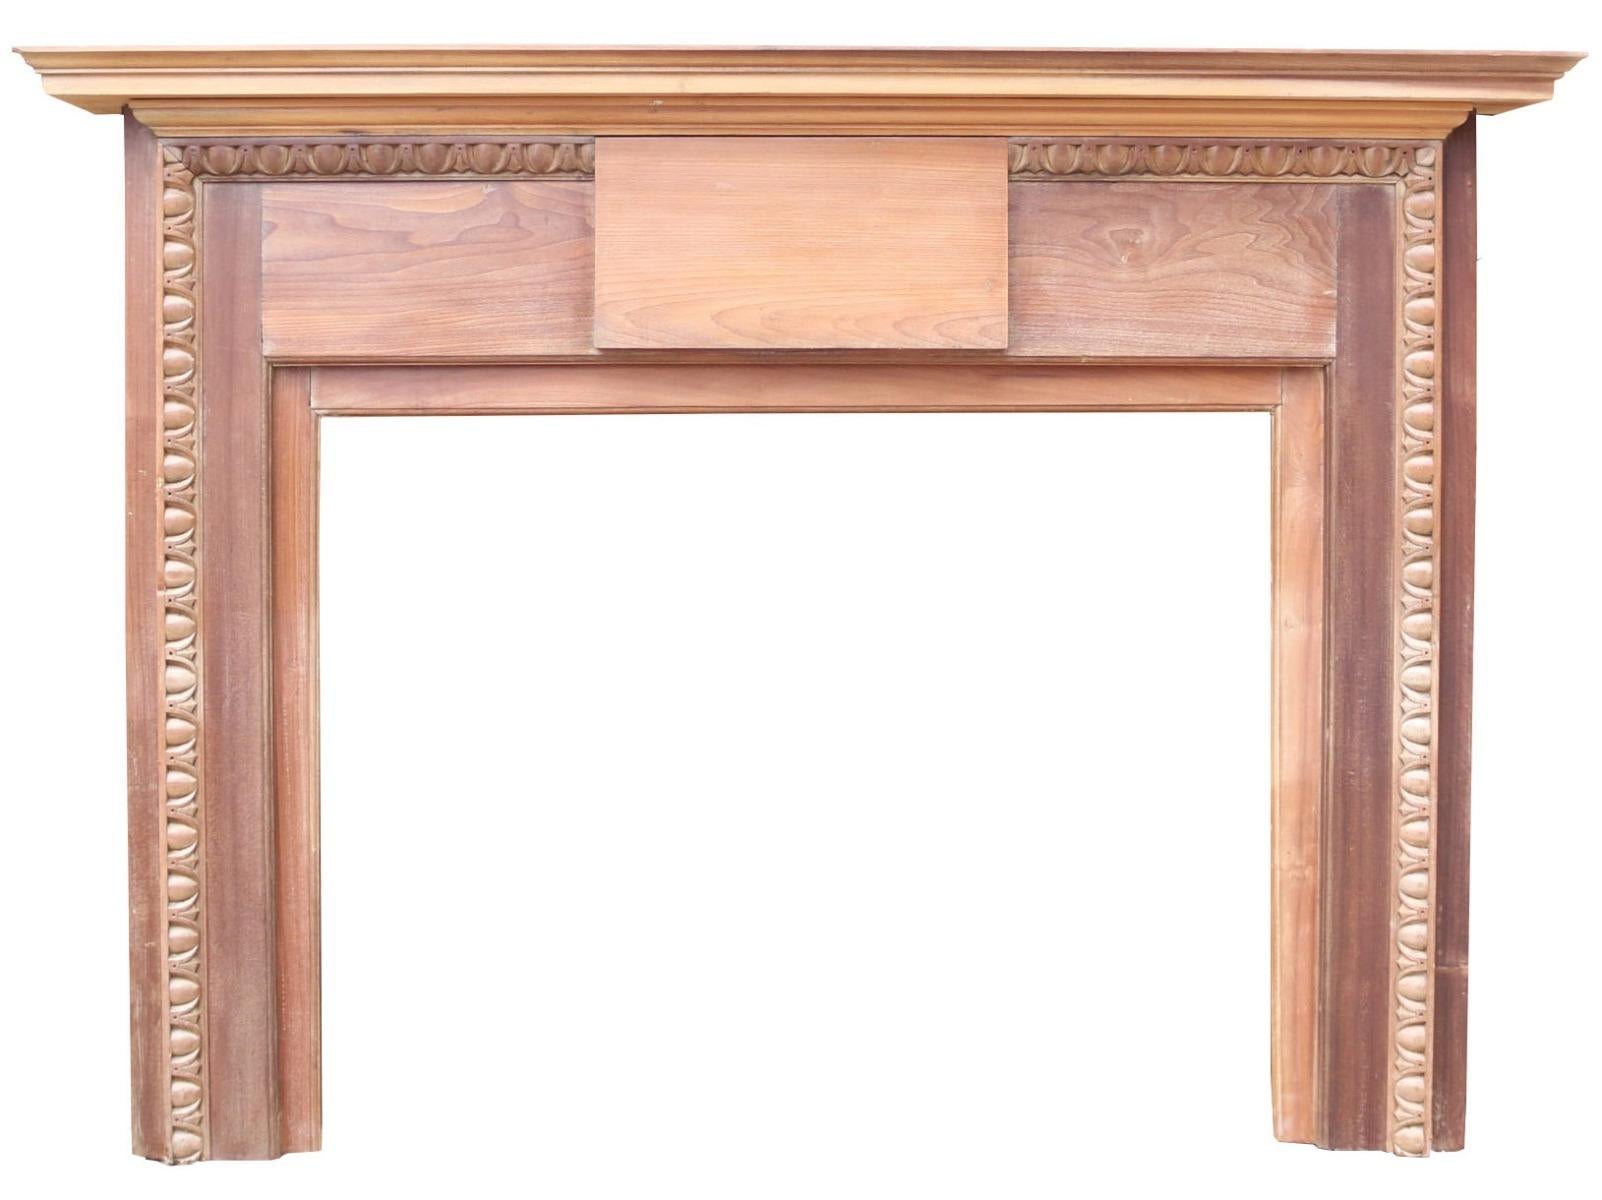 This English fire surround features hand carved egg and dart moulding.  By repute, from Mickleham hall, Dorking.

Additional dimensions

Opening height 75.5 cm

Opening width 96.5 cm

Width between outside of legs 137 cm.